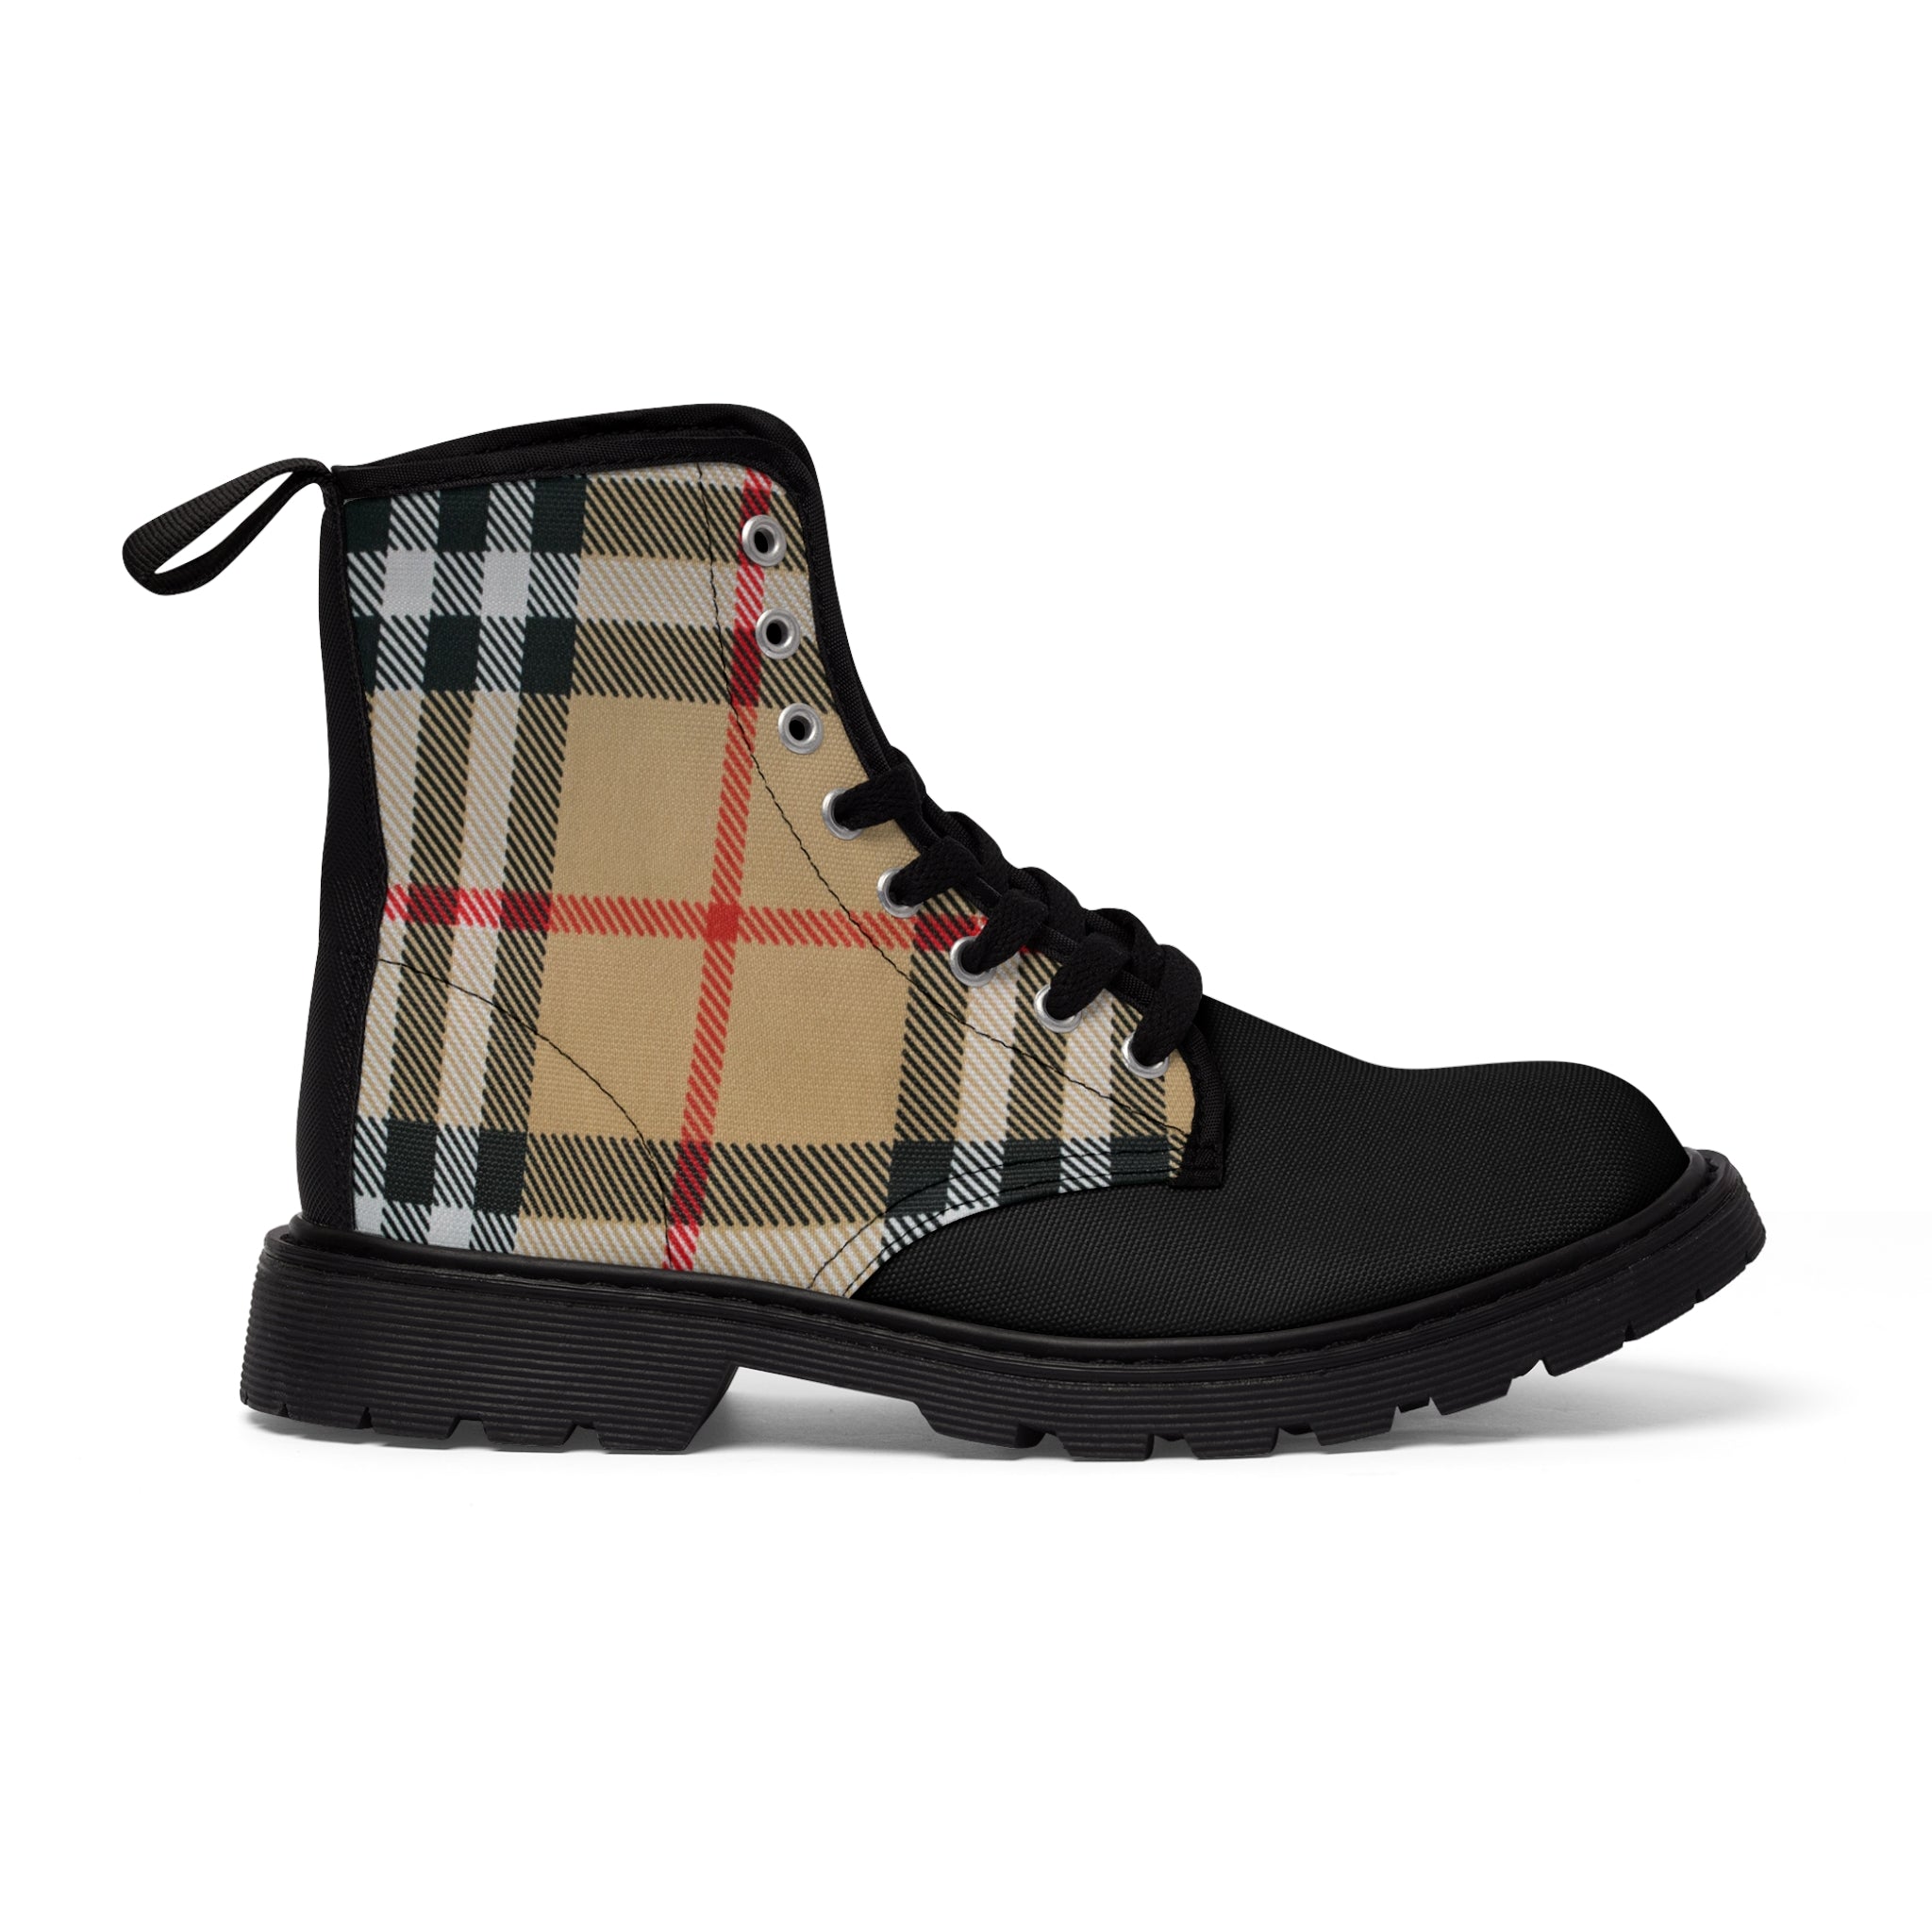  Groove Collection Dark Plaid Women's Canvas Boots BootsUS11Blacksole